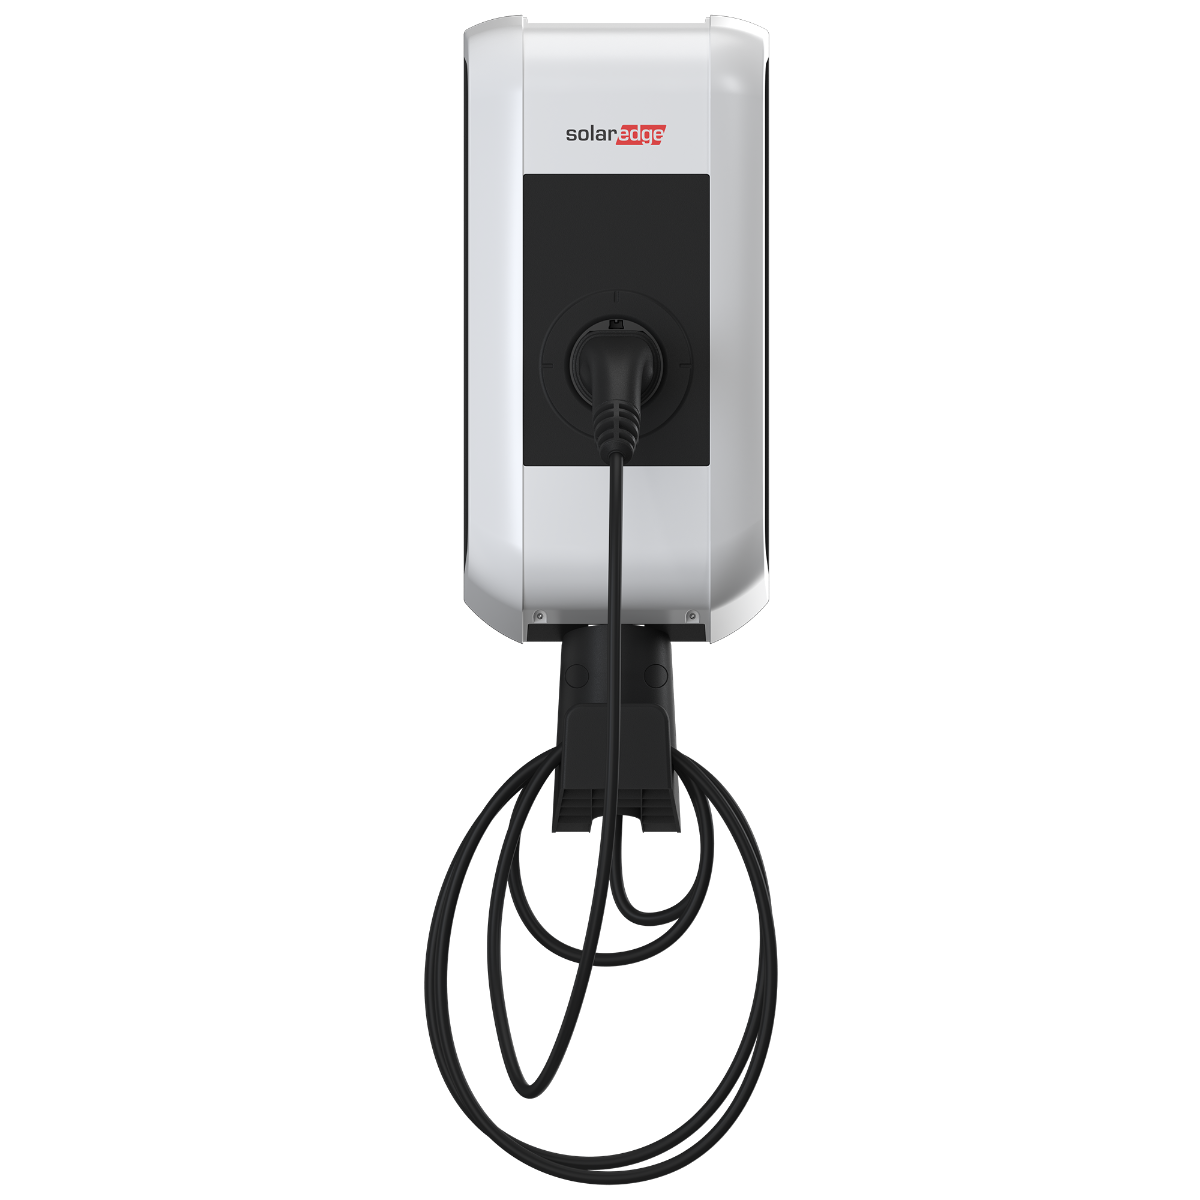 SolarEdge EV Charger, 22 kW, 6m Cable, Type 2 connector, RFID, MID